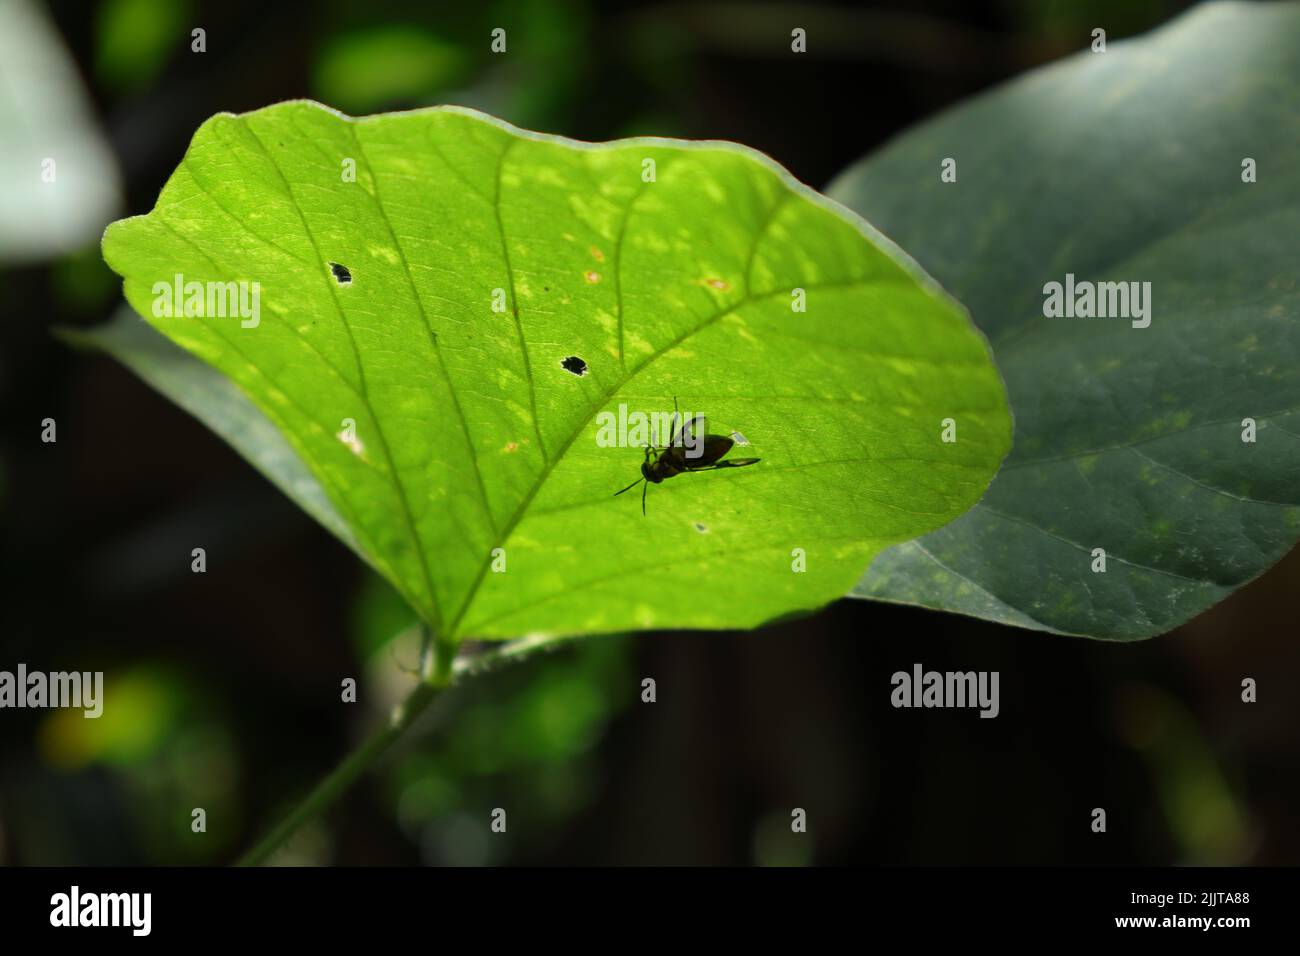 A small flying insect hiding under a wild leaf in the wild Stock Photo